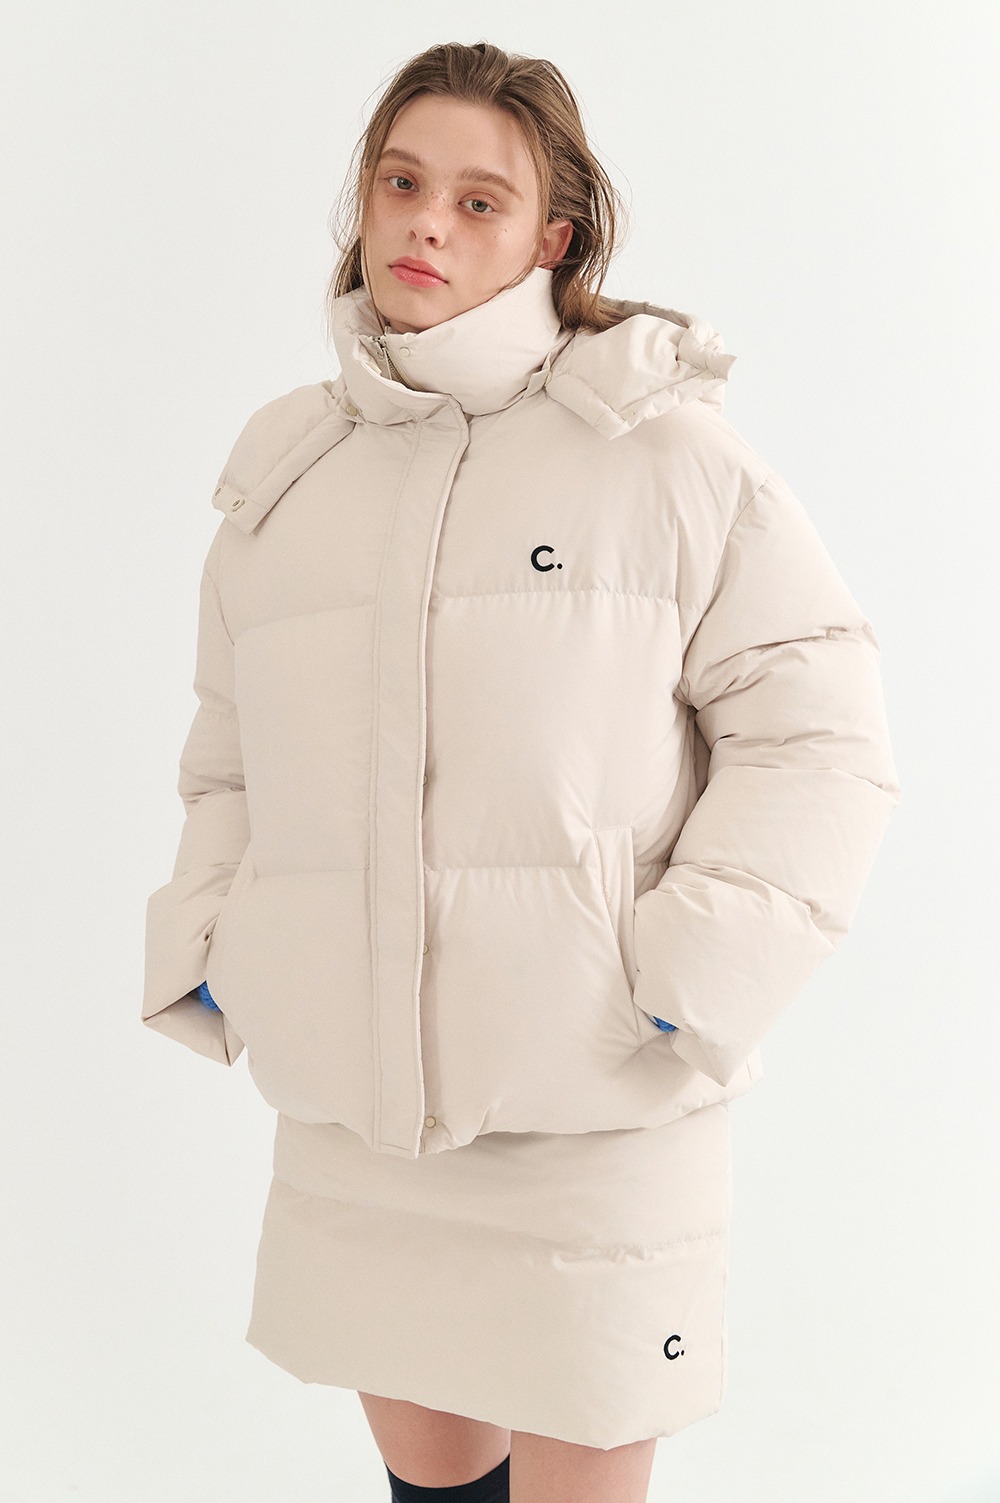 clove - [21Winter] Hooded quilted down jacket (Ivory)